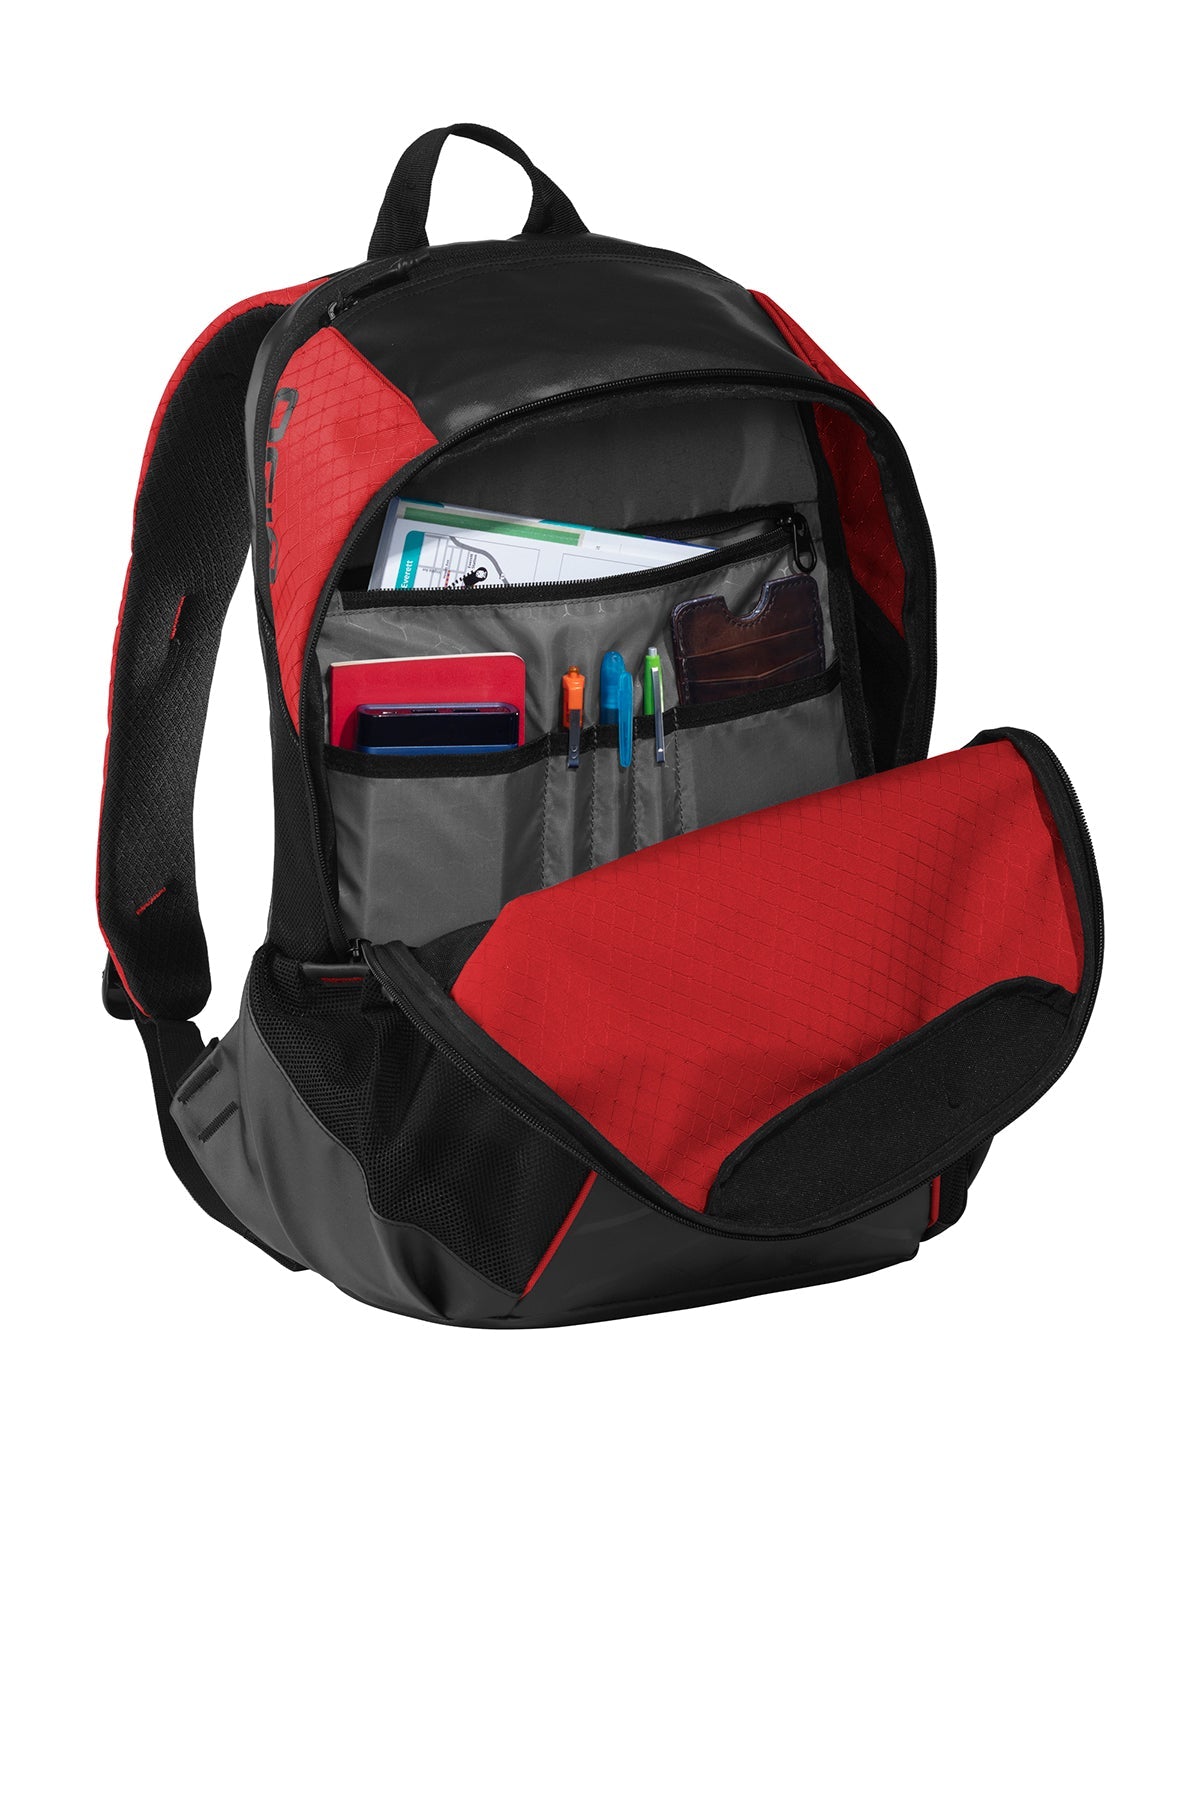 OGIO Basis Customzied Backpacks, Ripped Red